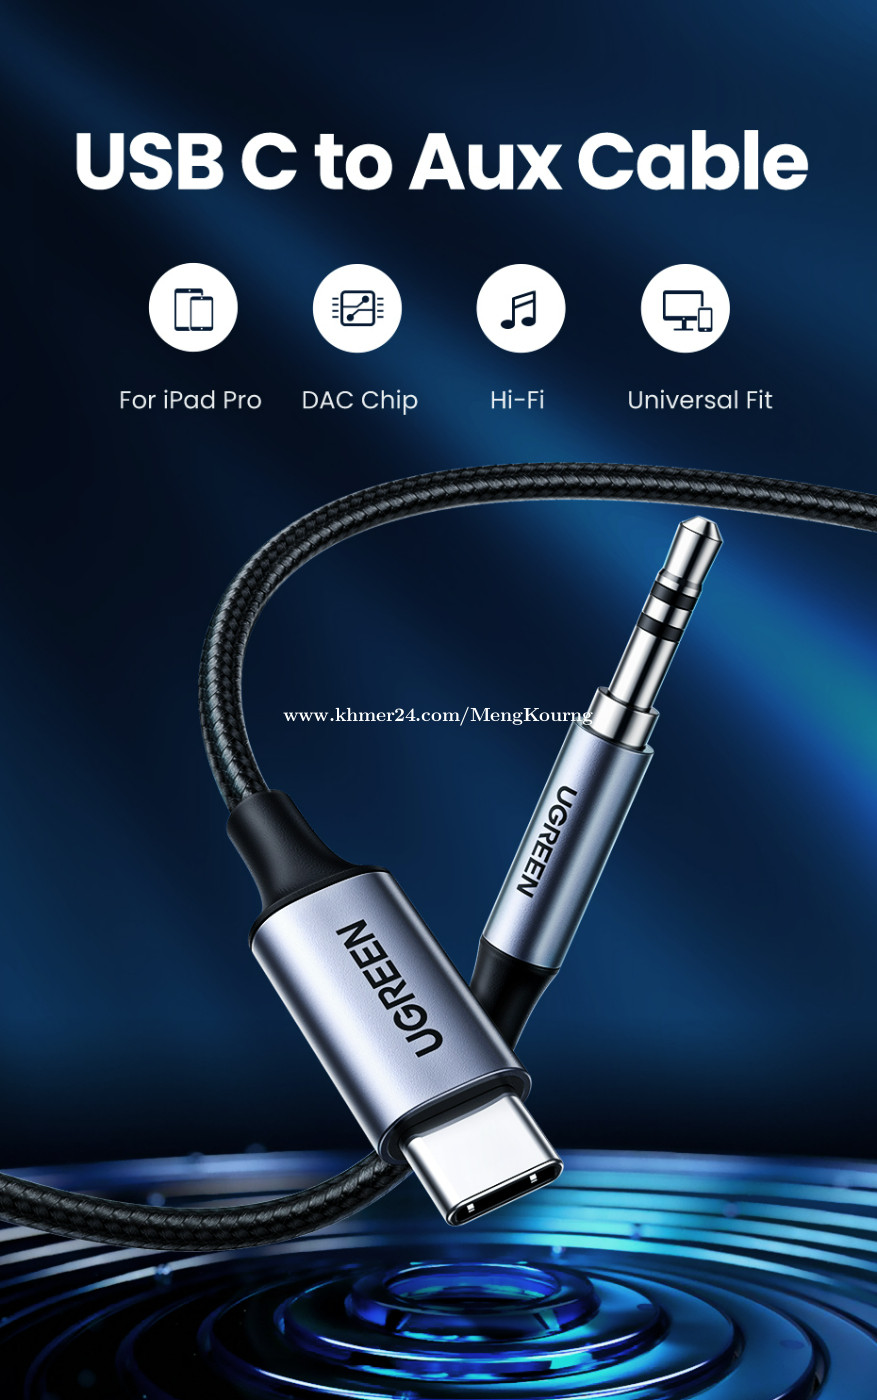 UGREEN USB-C to 3.5mm Audio Cable with Chip 1m 20192 price $10.00 in Phnom  Penh, Cambodia - MENG KOURNG CHUOR